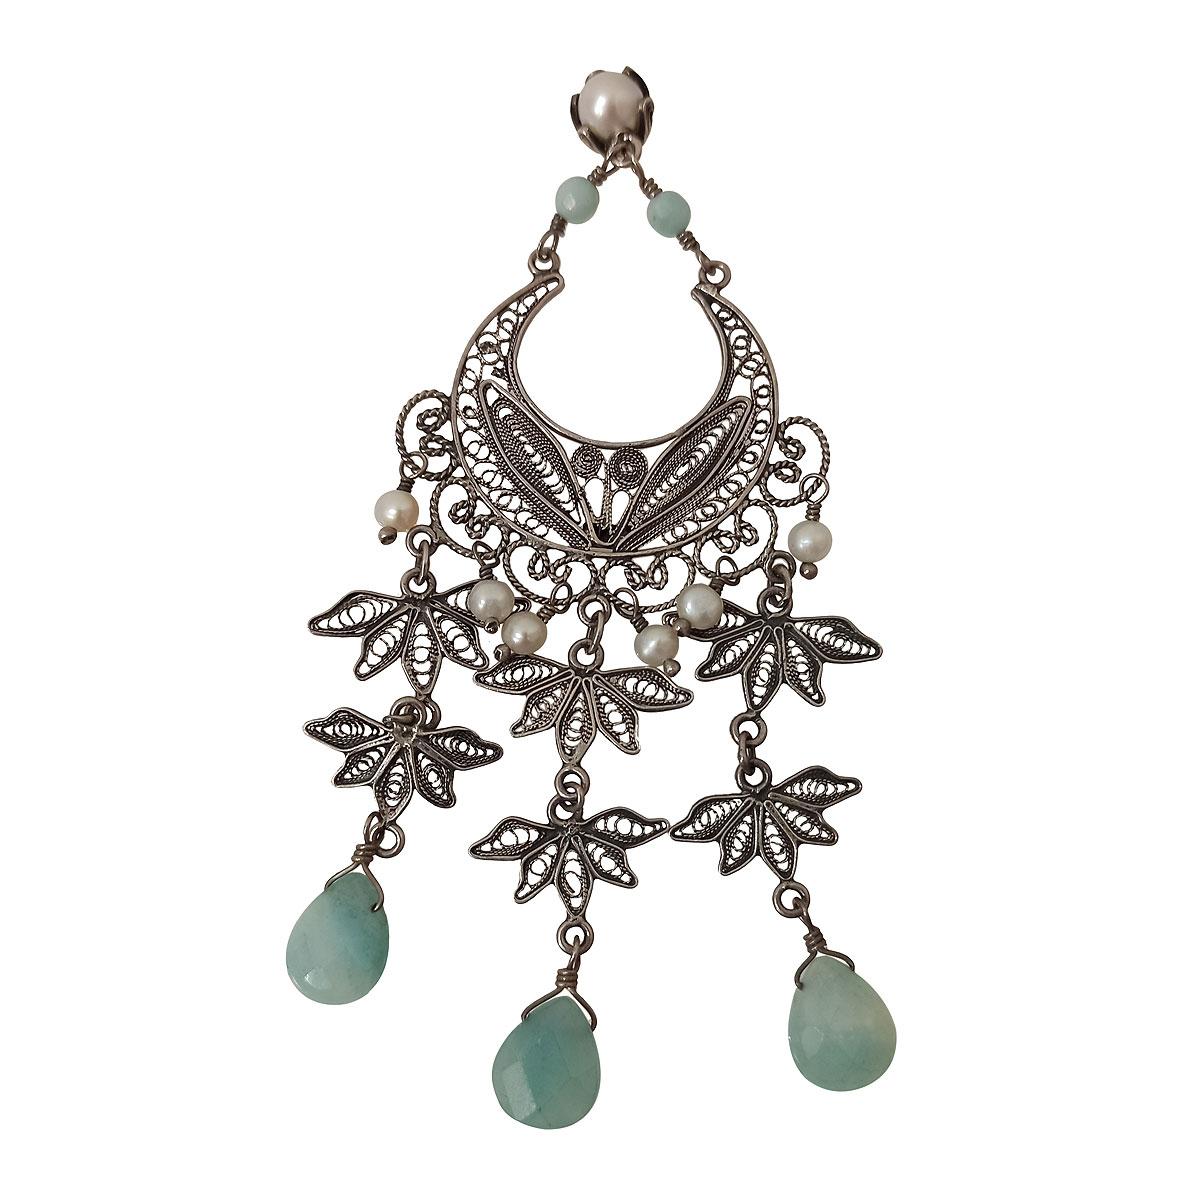 Beautiful earrings by Yvone Christa NY
925 Silver filigree
Mint green faceted elements
Beads
Length cm 10 (3,93 inches)
Triple pendant
Worldwide express shipping included in the price !